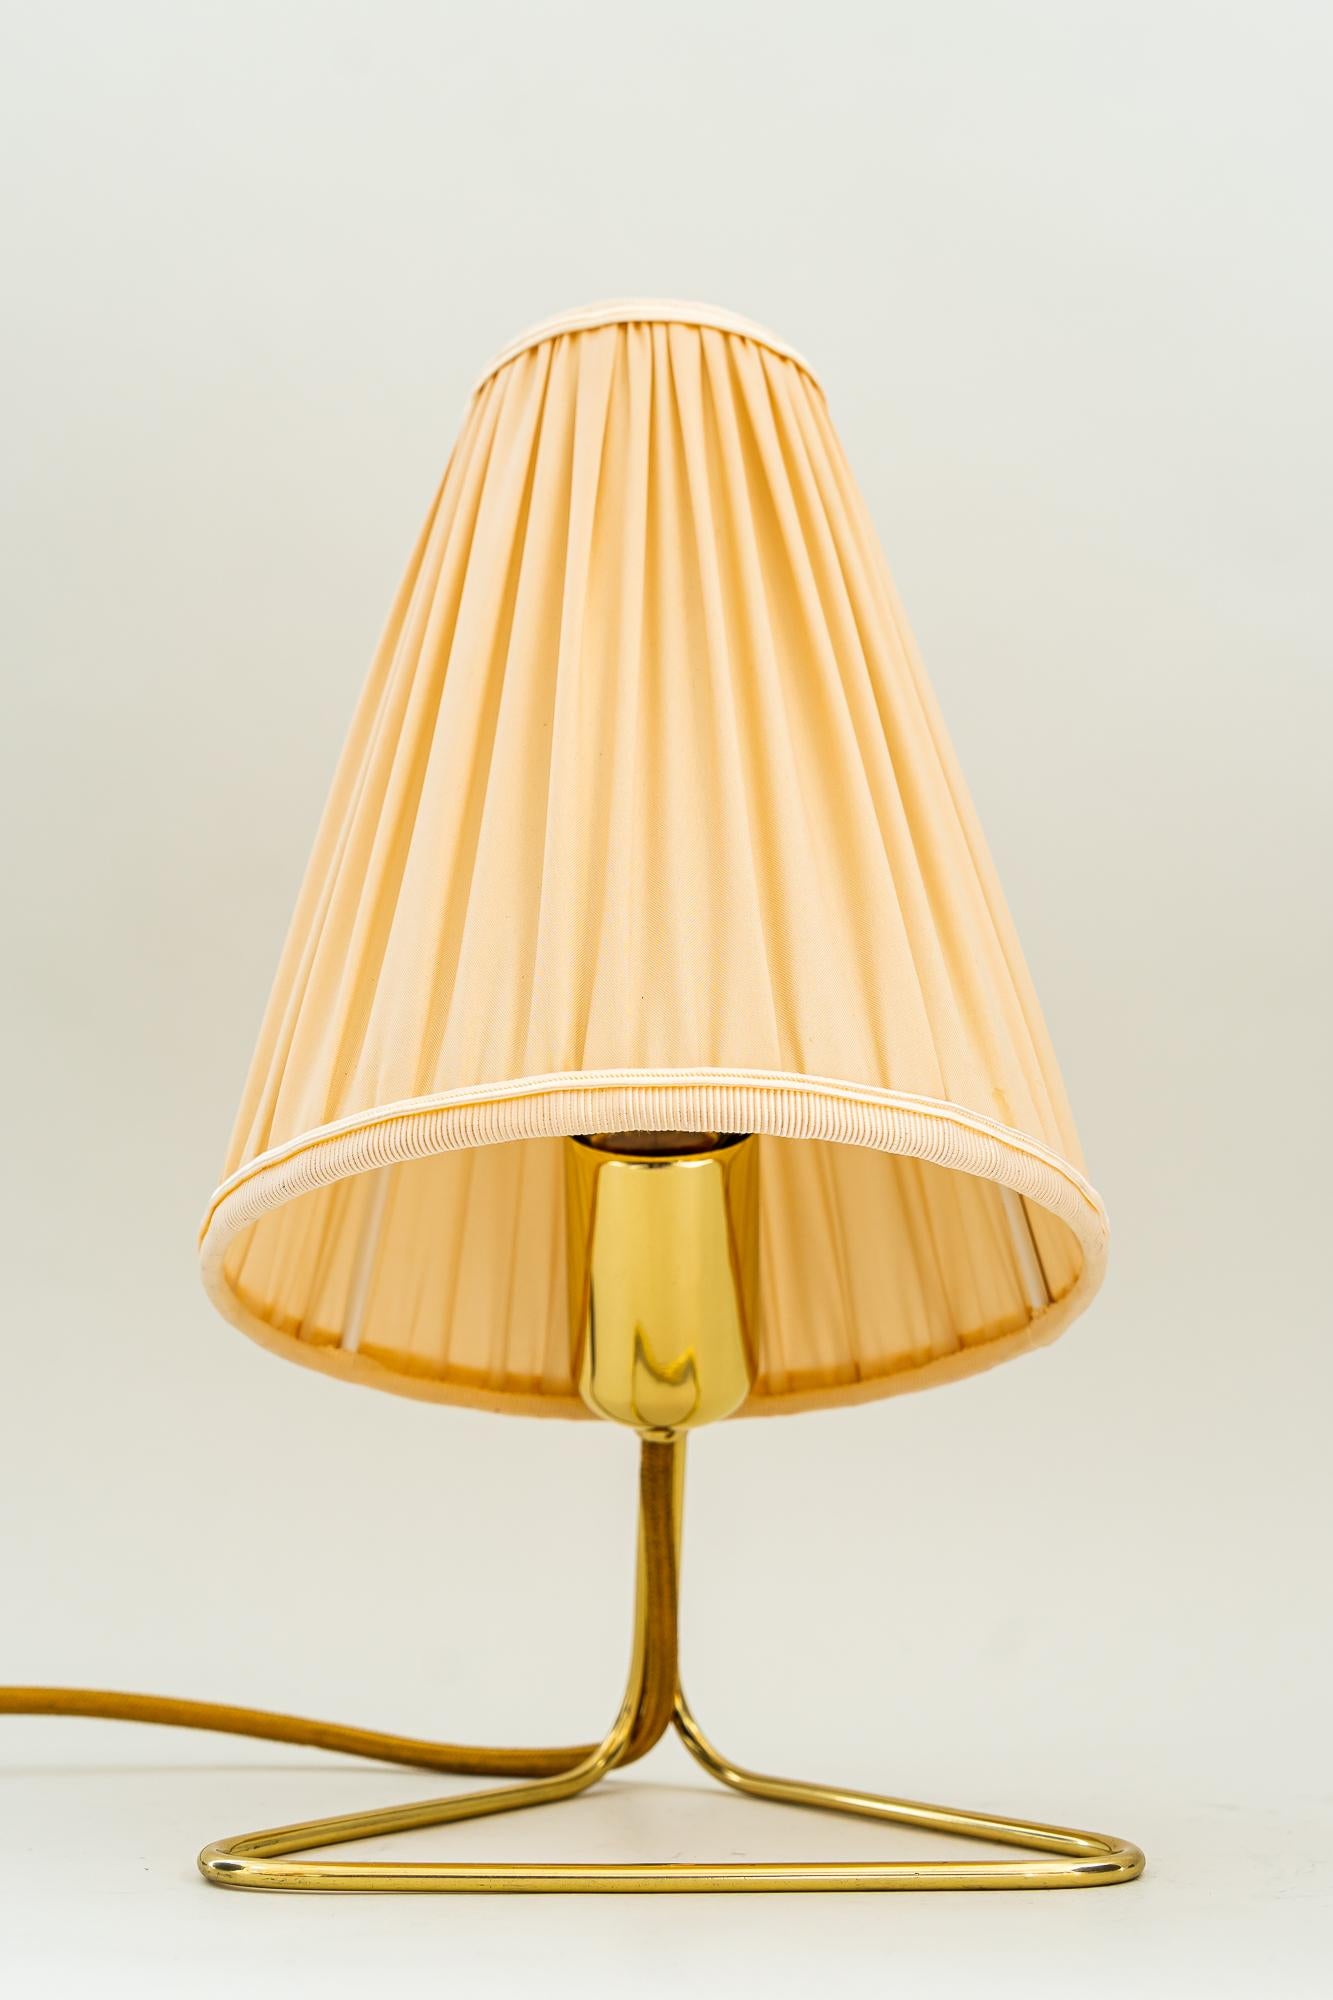 Lacquered Rupert Nikoll Table Lamp Vienna around 1950s